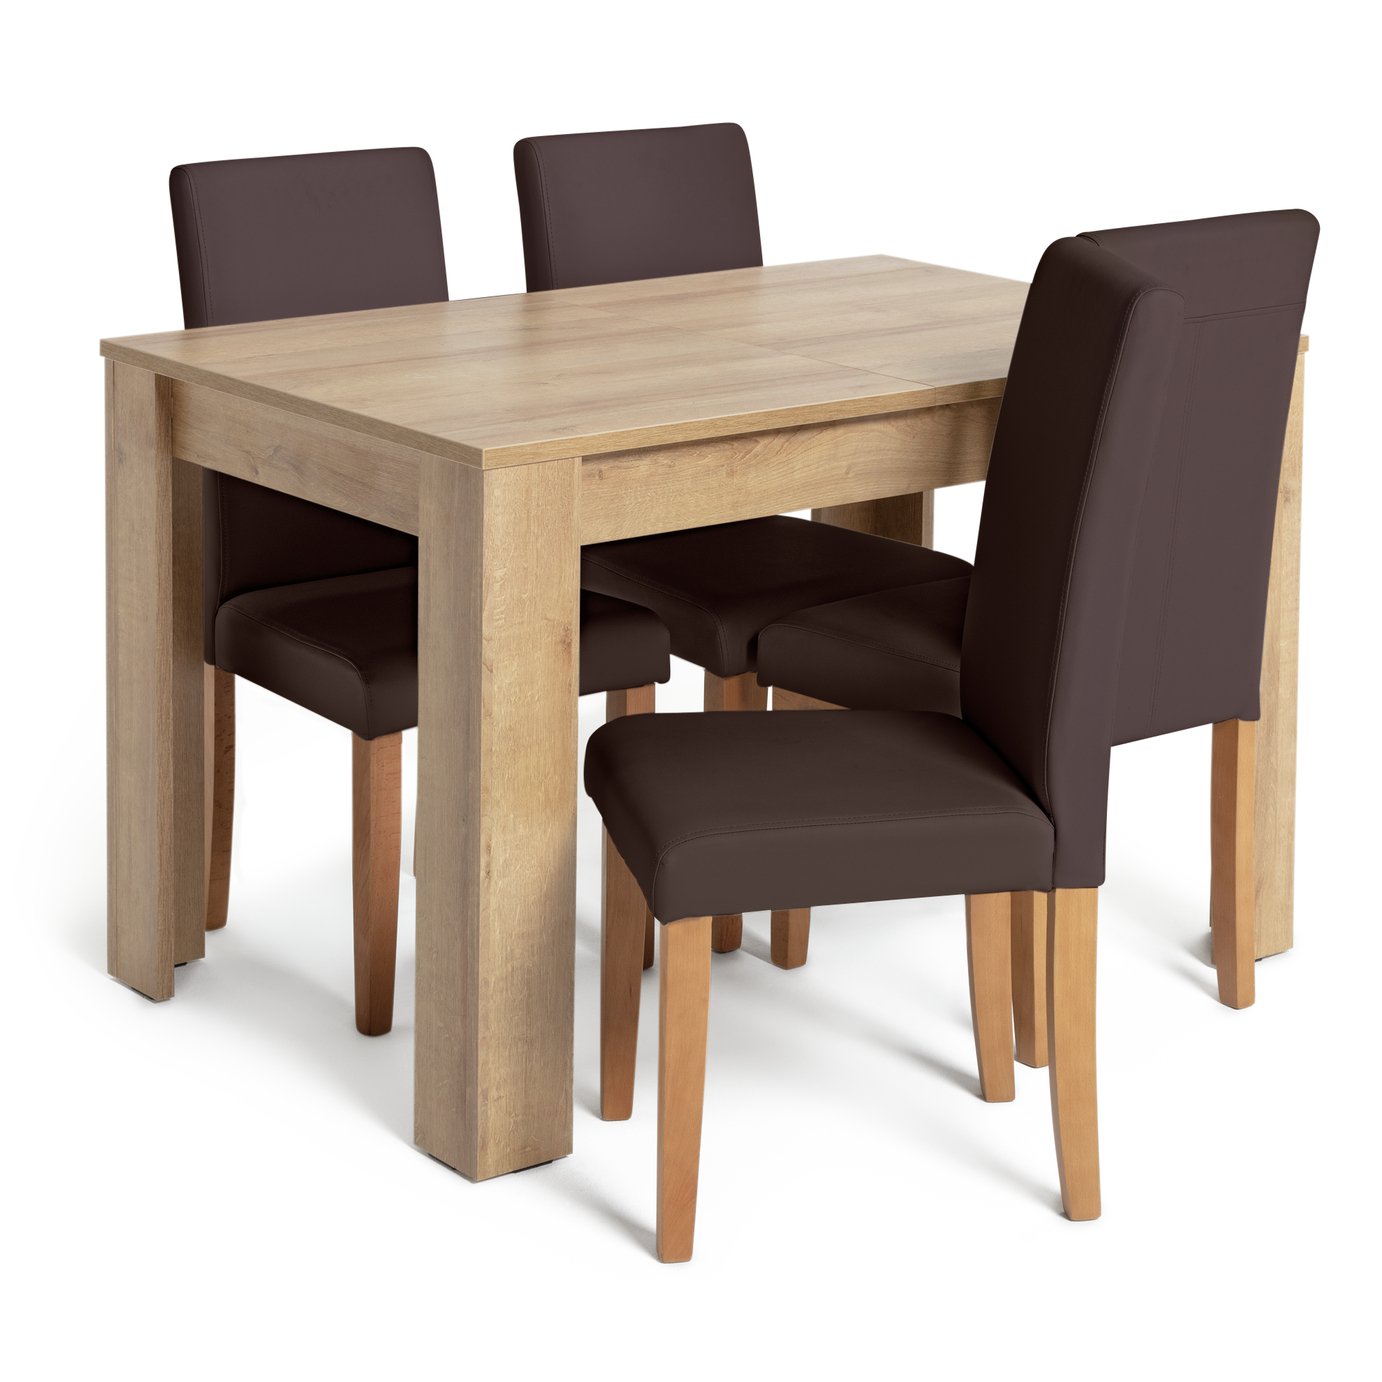 Argos Home Miami Extending Table & 4 Chocolate Chairs